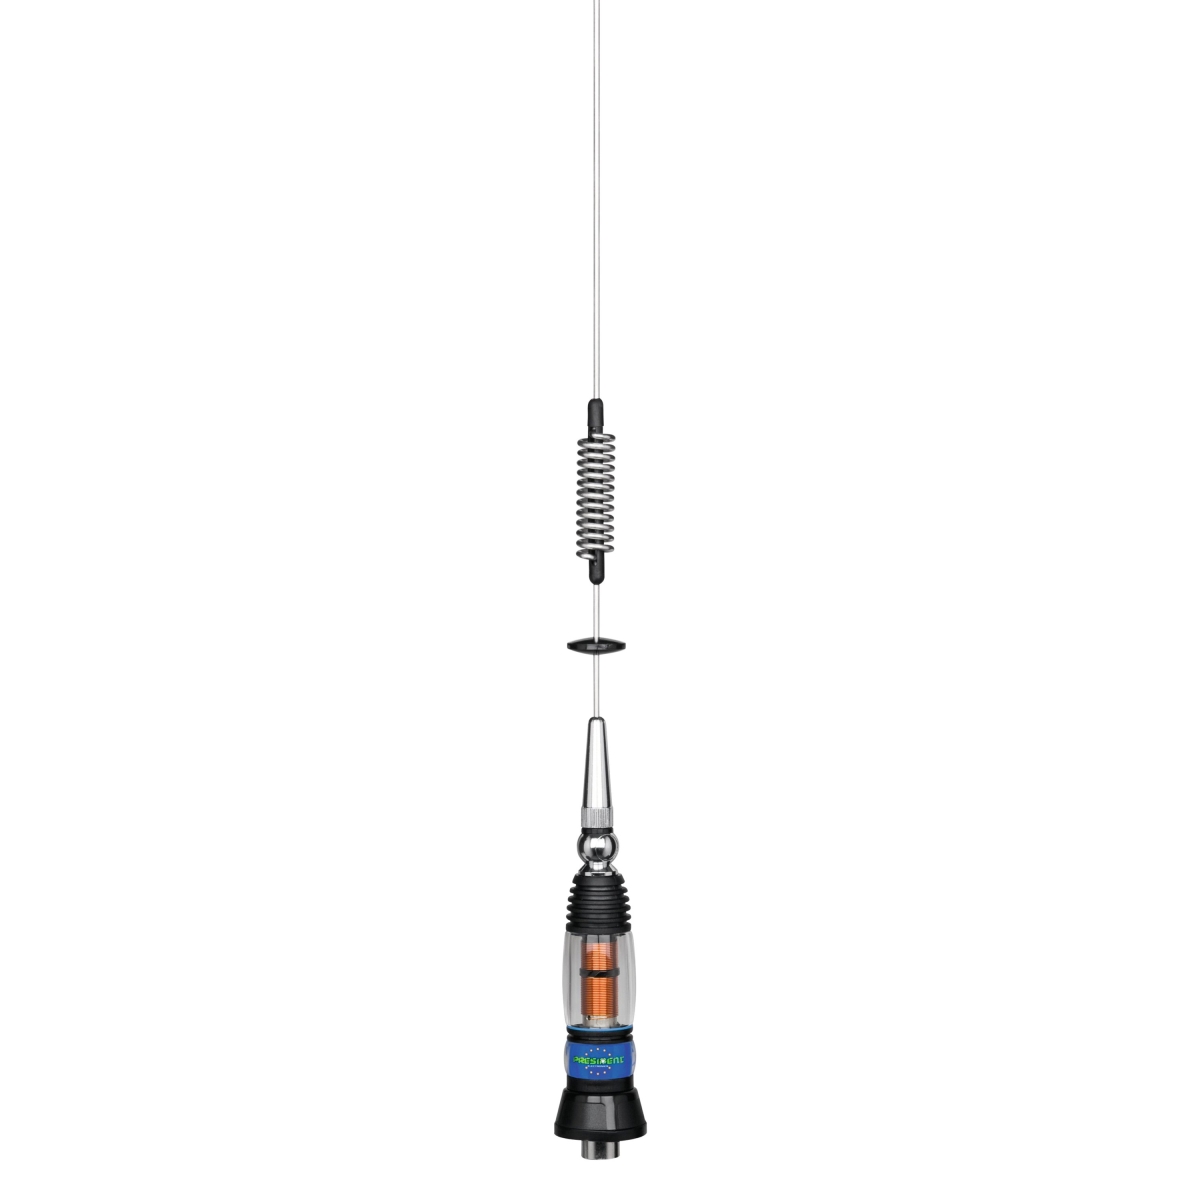 Picture of President MISSISSIPPI RW 28.35 in. Stainless Steel Base Load CB Antenna